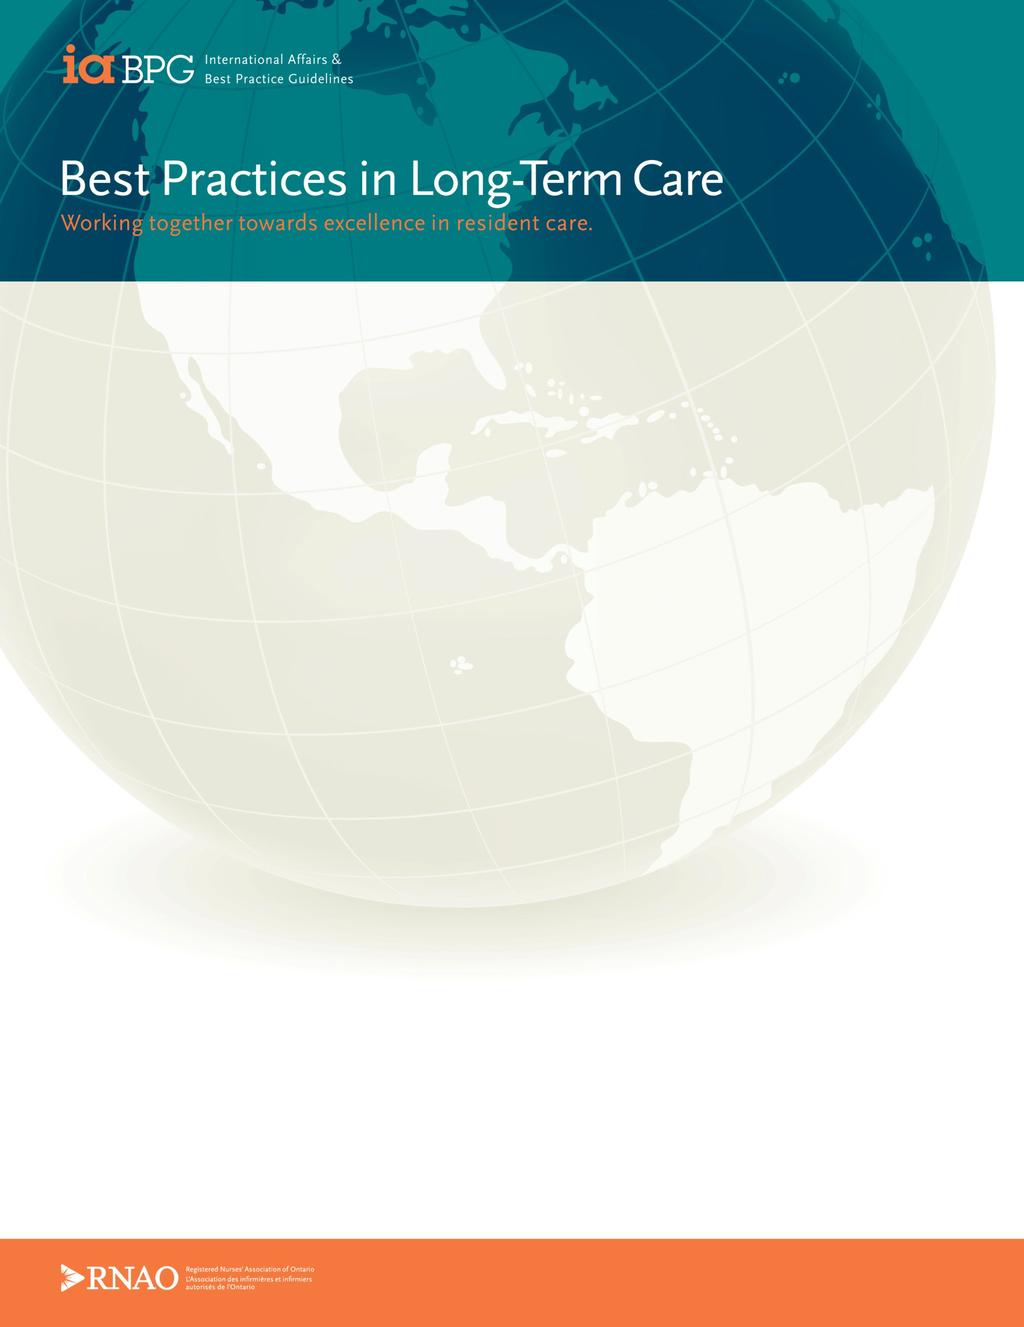 Spring 2010 IN THIS ISSUE Linking Best Practices with Quality Improvement By Josephine Santos, RN, MN Program Manager, LTC Best Practices Initiative In November 2009, the Long-Term Care Best